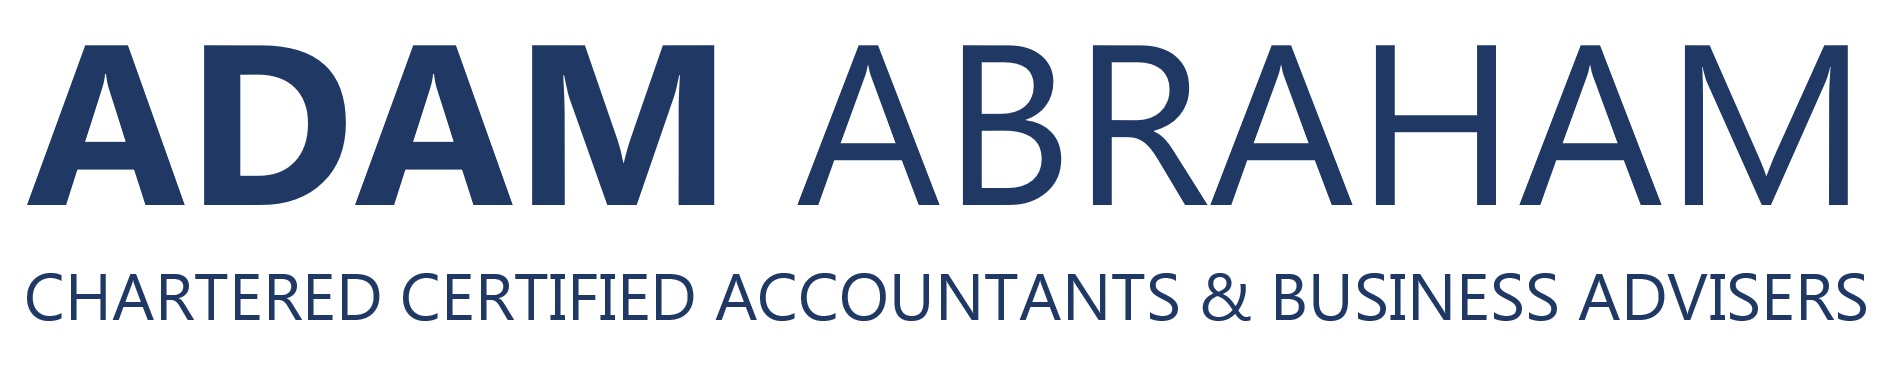 ADAM ABRAHAM CHARTERED CERTIFIED ACCOUNTANTS & BUSINESS ADVISERS IN NOTTINGHAM